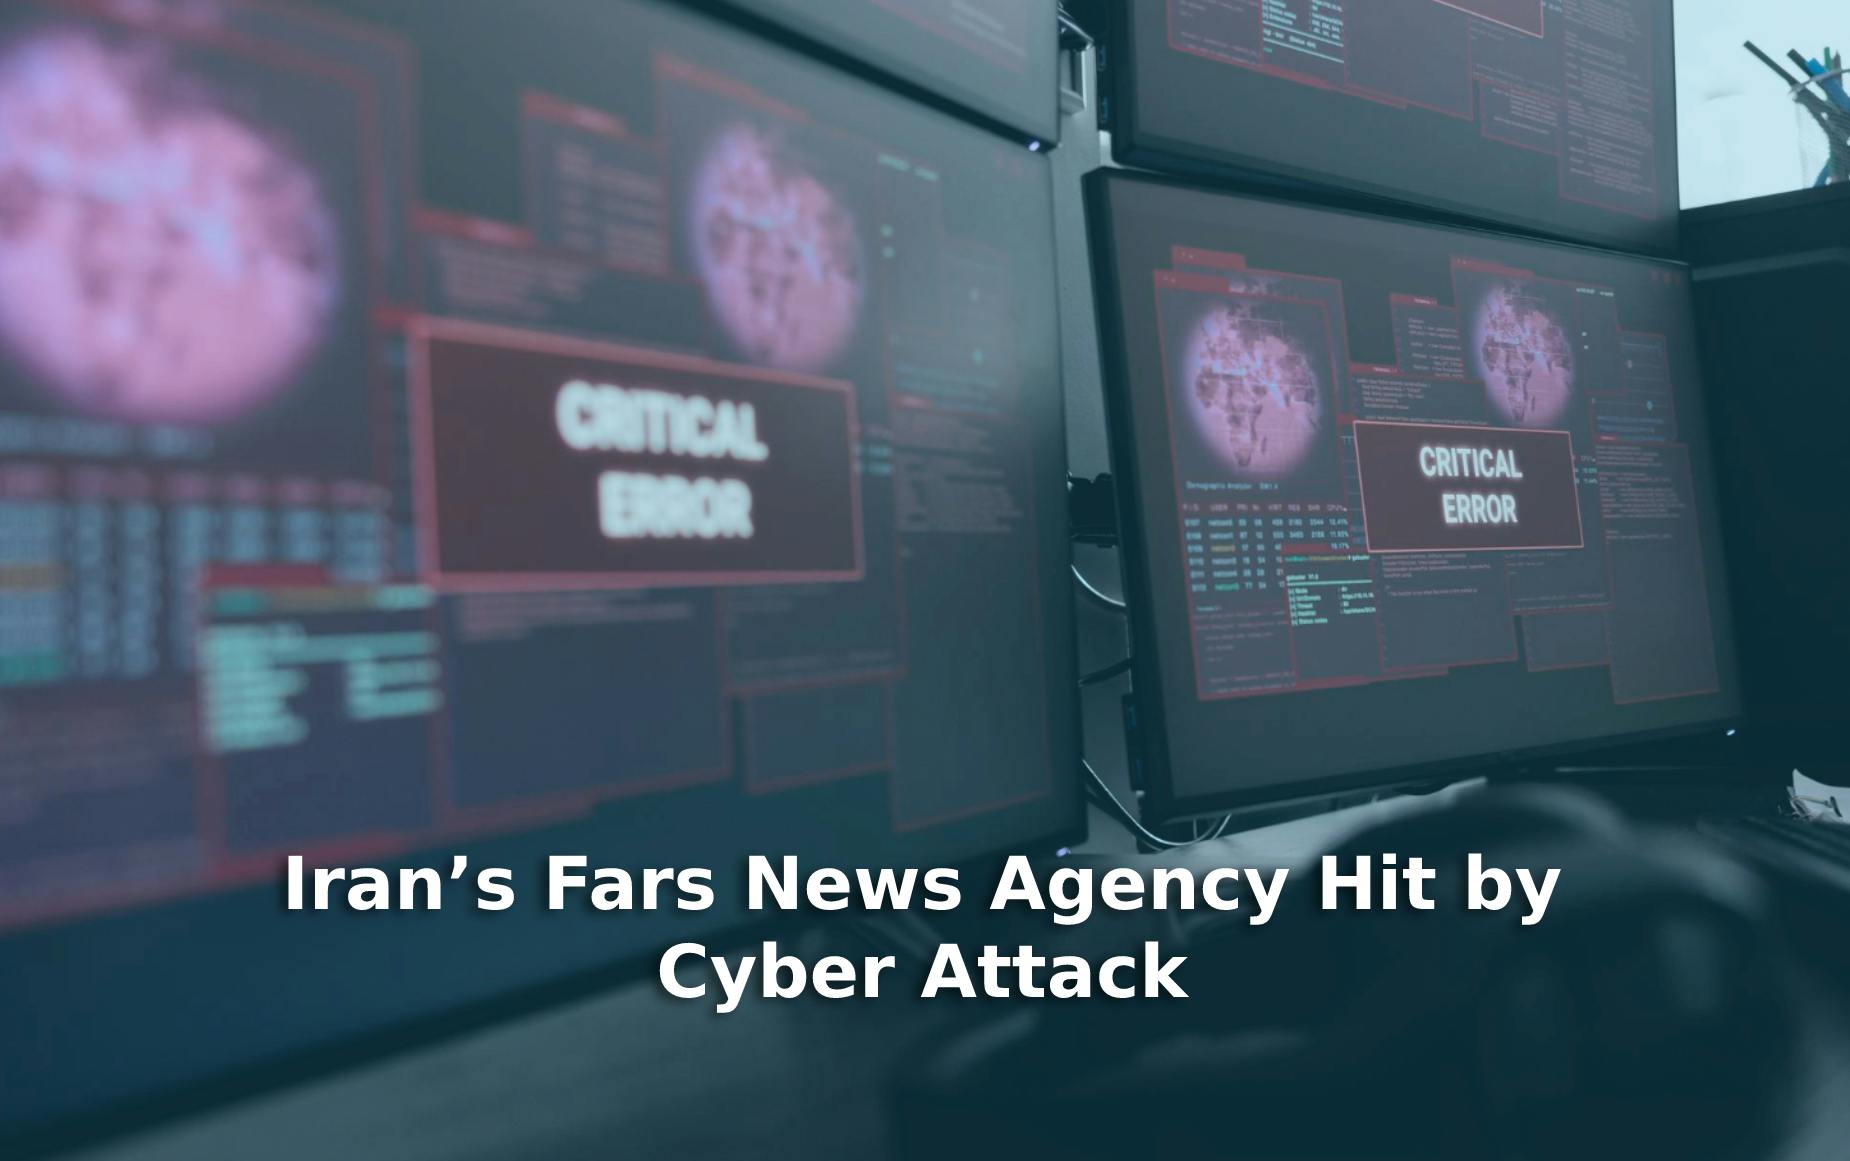 Iran’s Fars News Agency Hit by Cyber Attack